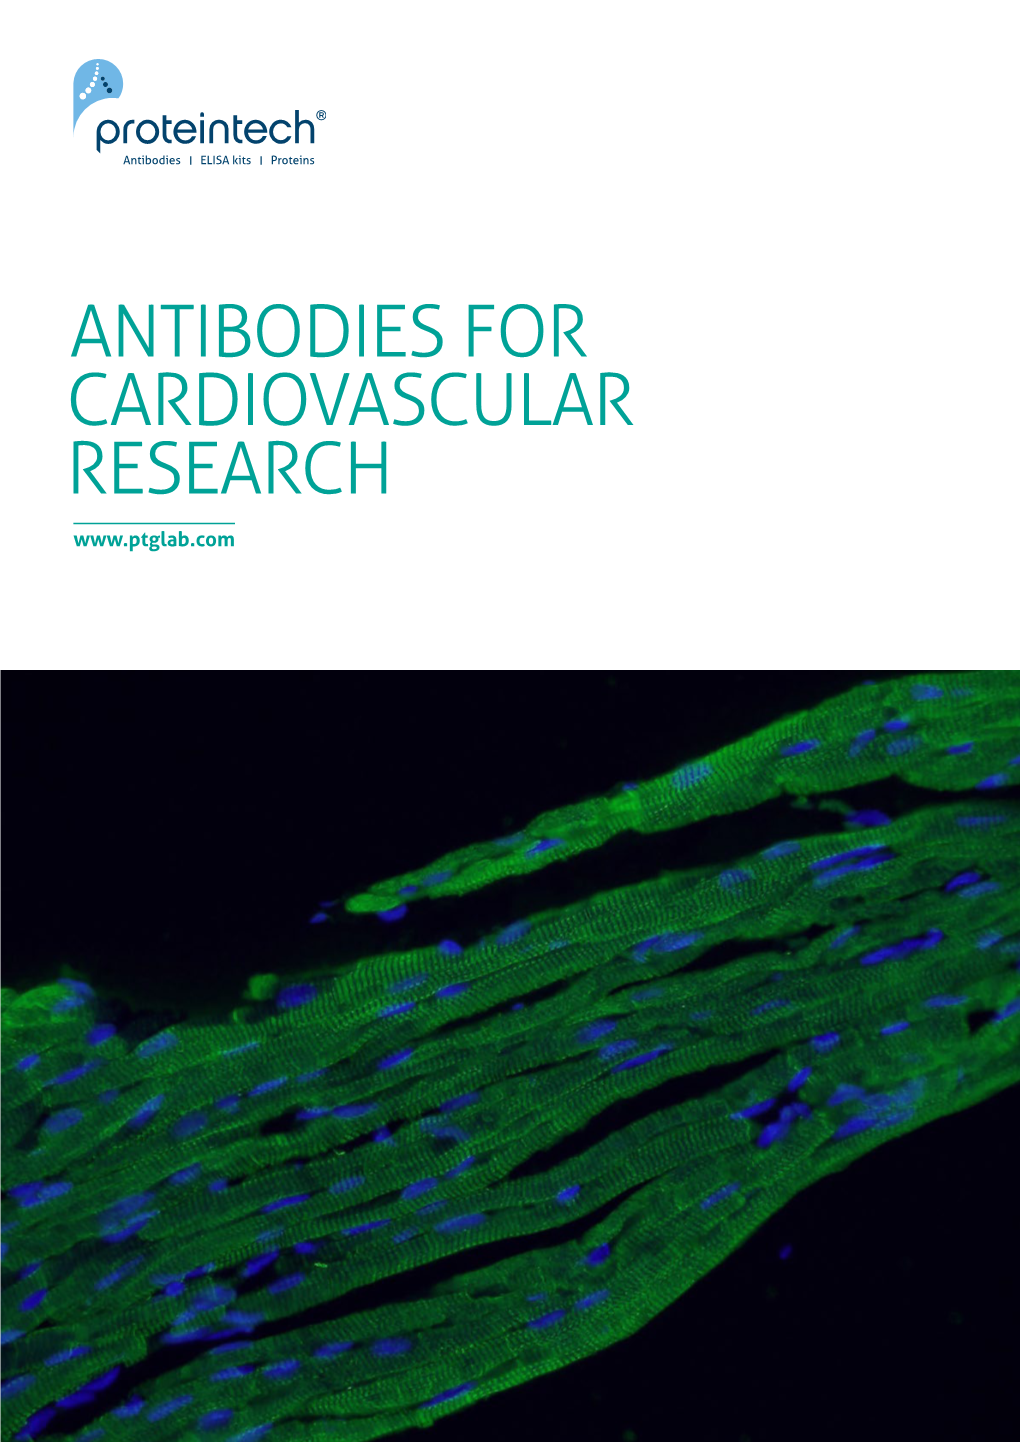 CARDIOVASCULAR RESEARCH 2 Antibodies for Cardiovascular Research